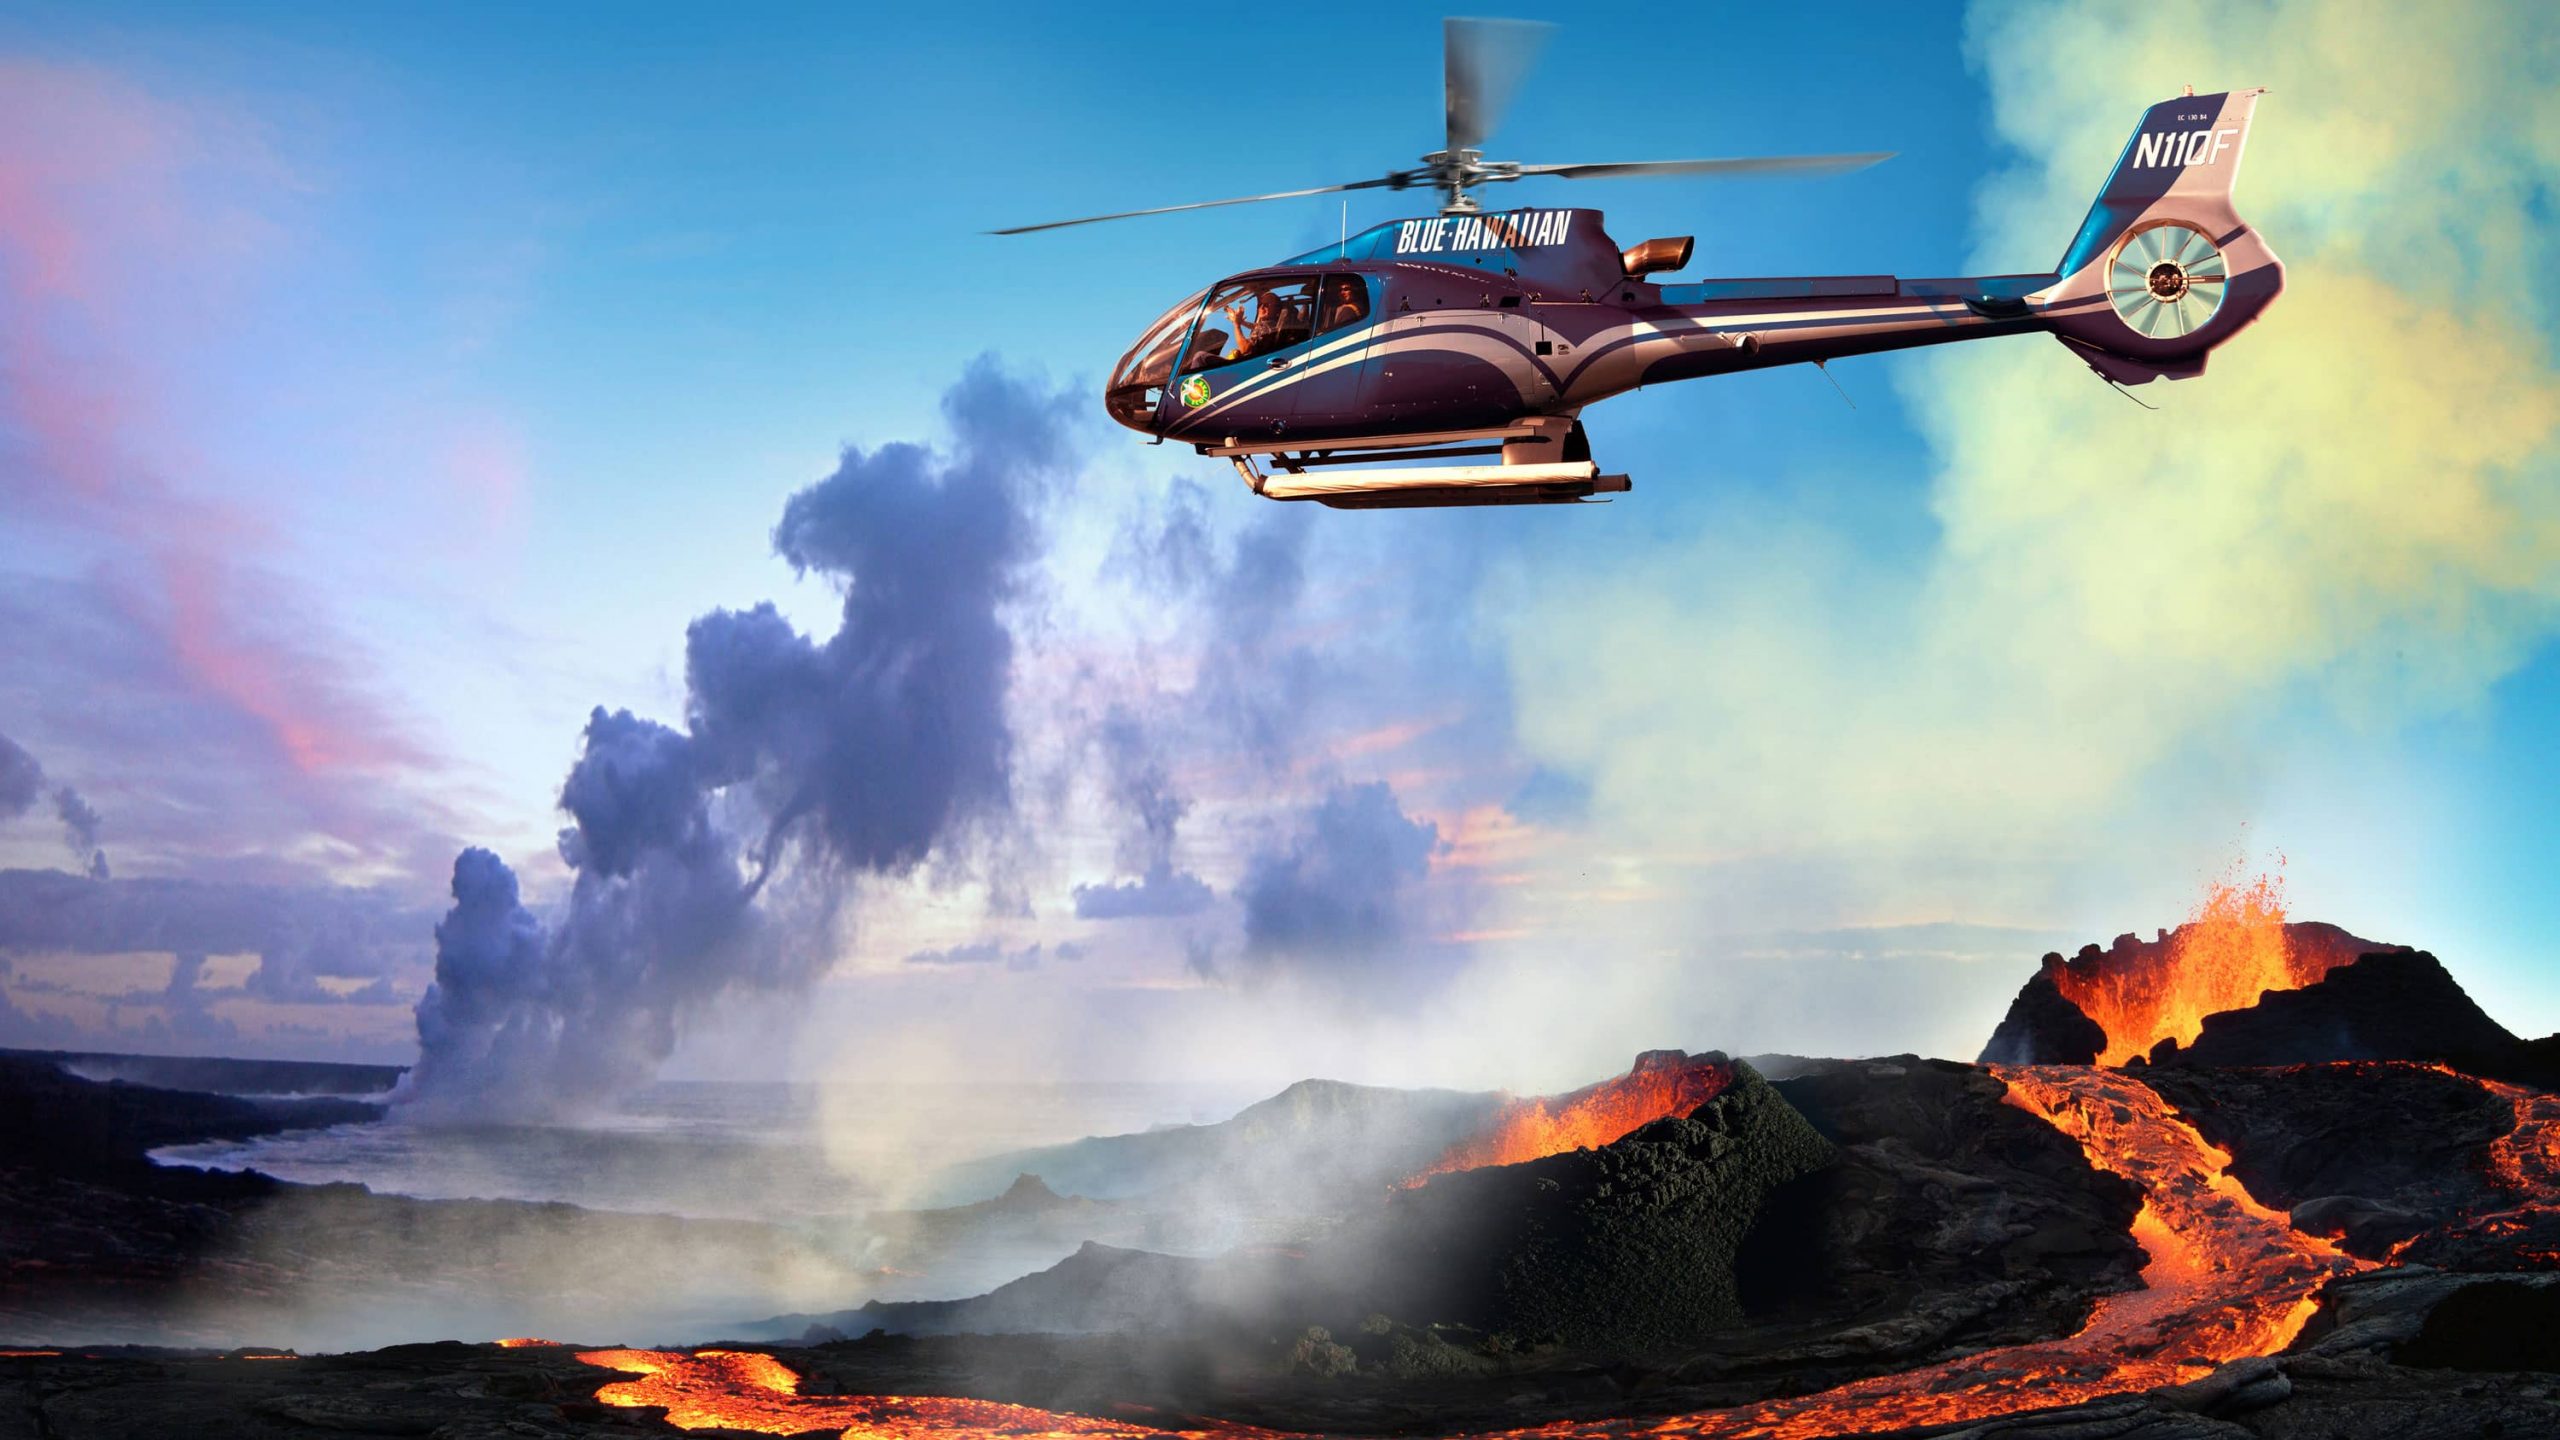 Helicopter flying near mouth of an erupting volcano